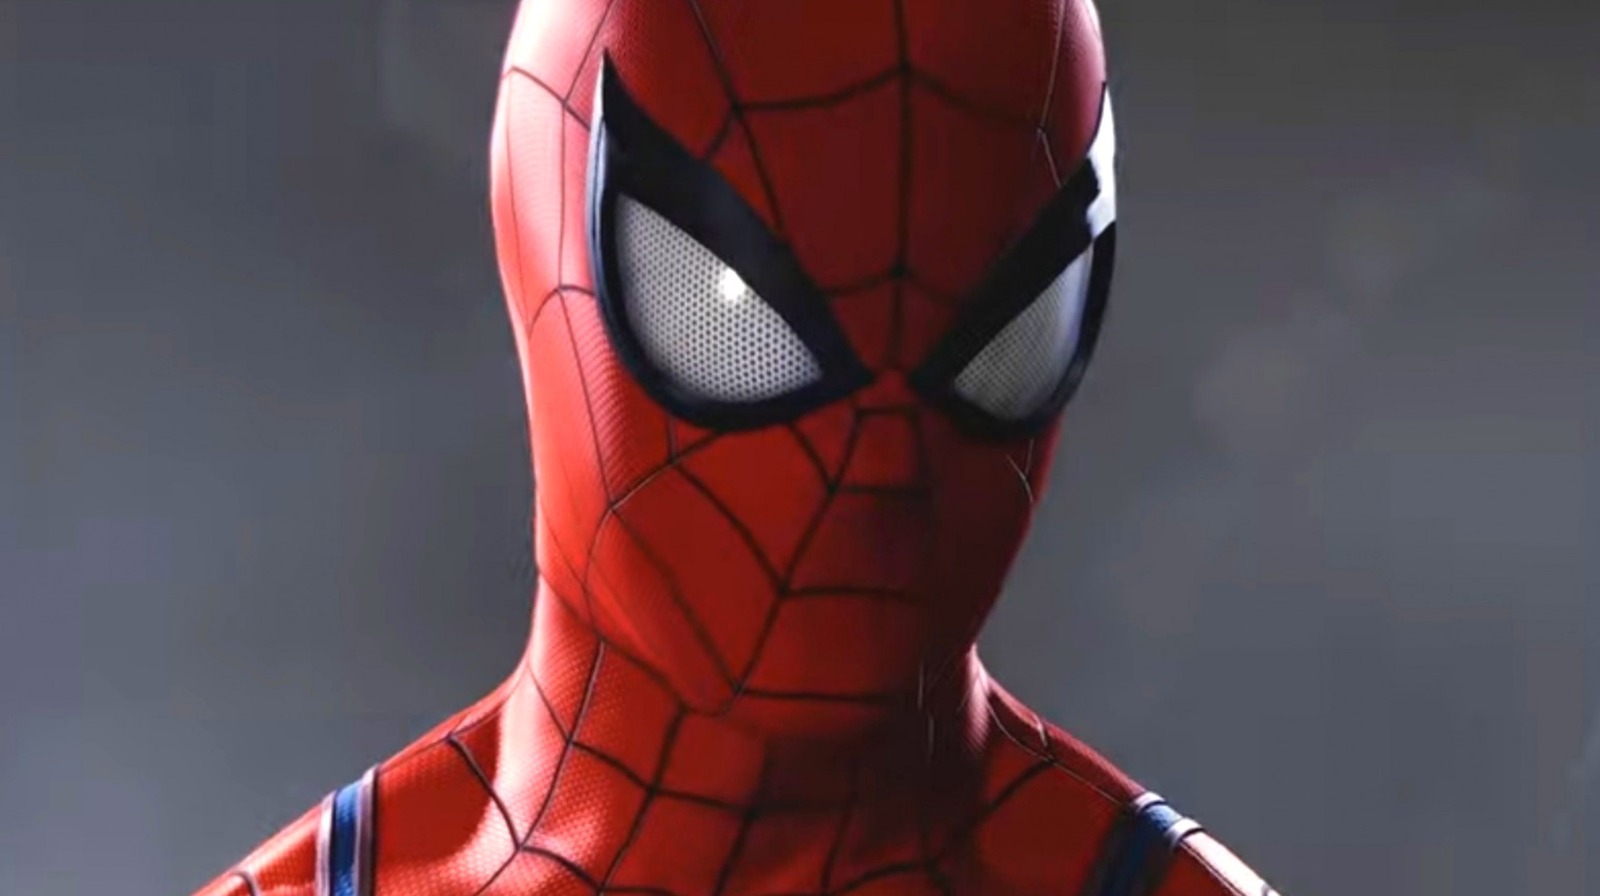 How long is Spider-Man Remastered?